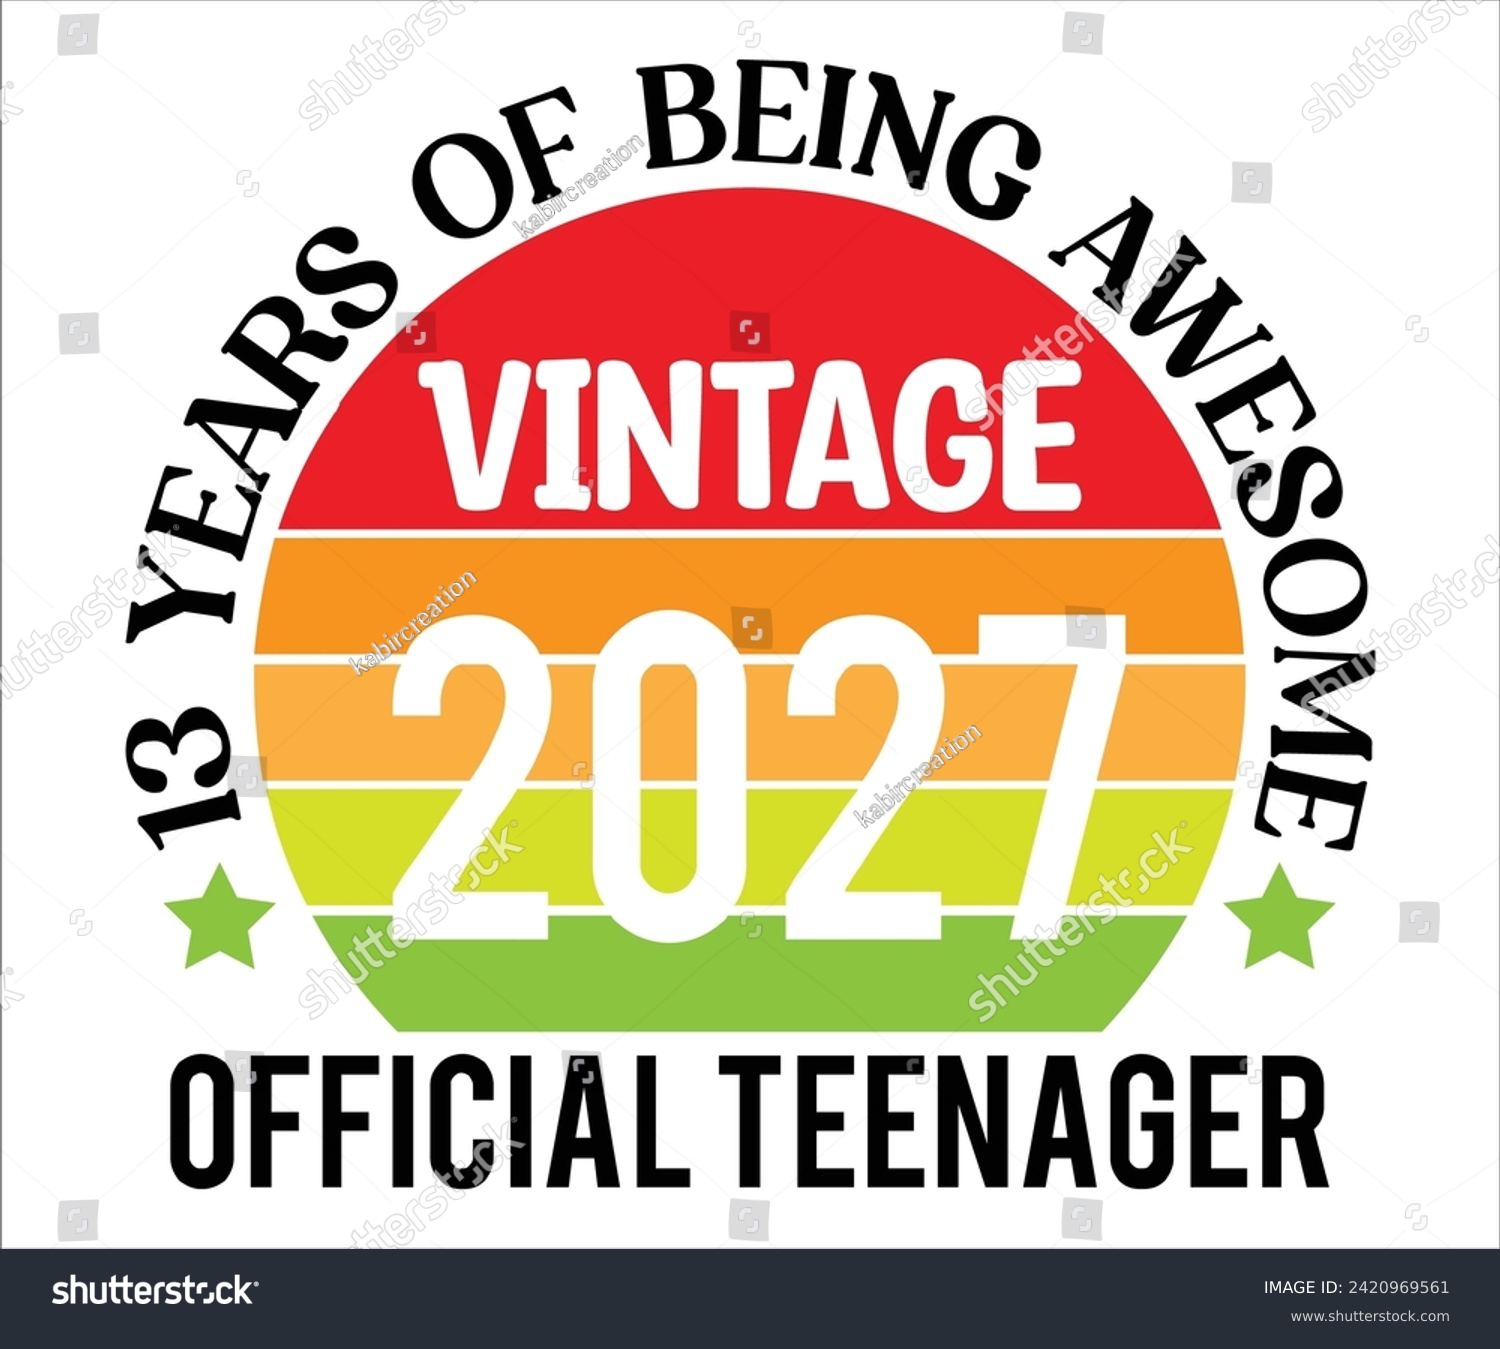 SVG of  13 Years Of Being Wesome 2027 Official Teenager T-shirt,100 Day School Svg,100 Day School T-shirt, welcome Back To, School Day, 100 Days Of School Shirt Boy, 100 Days Shirt svg